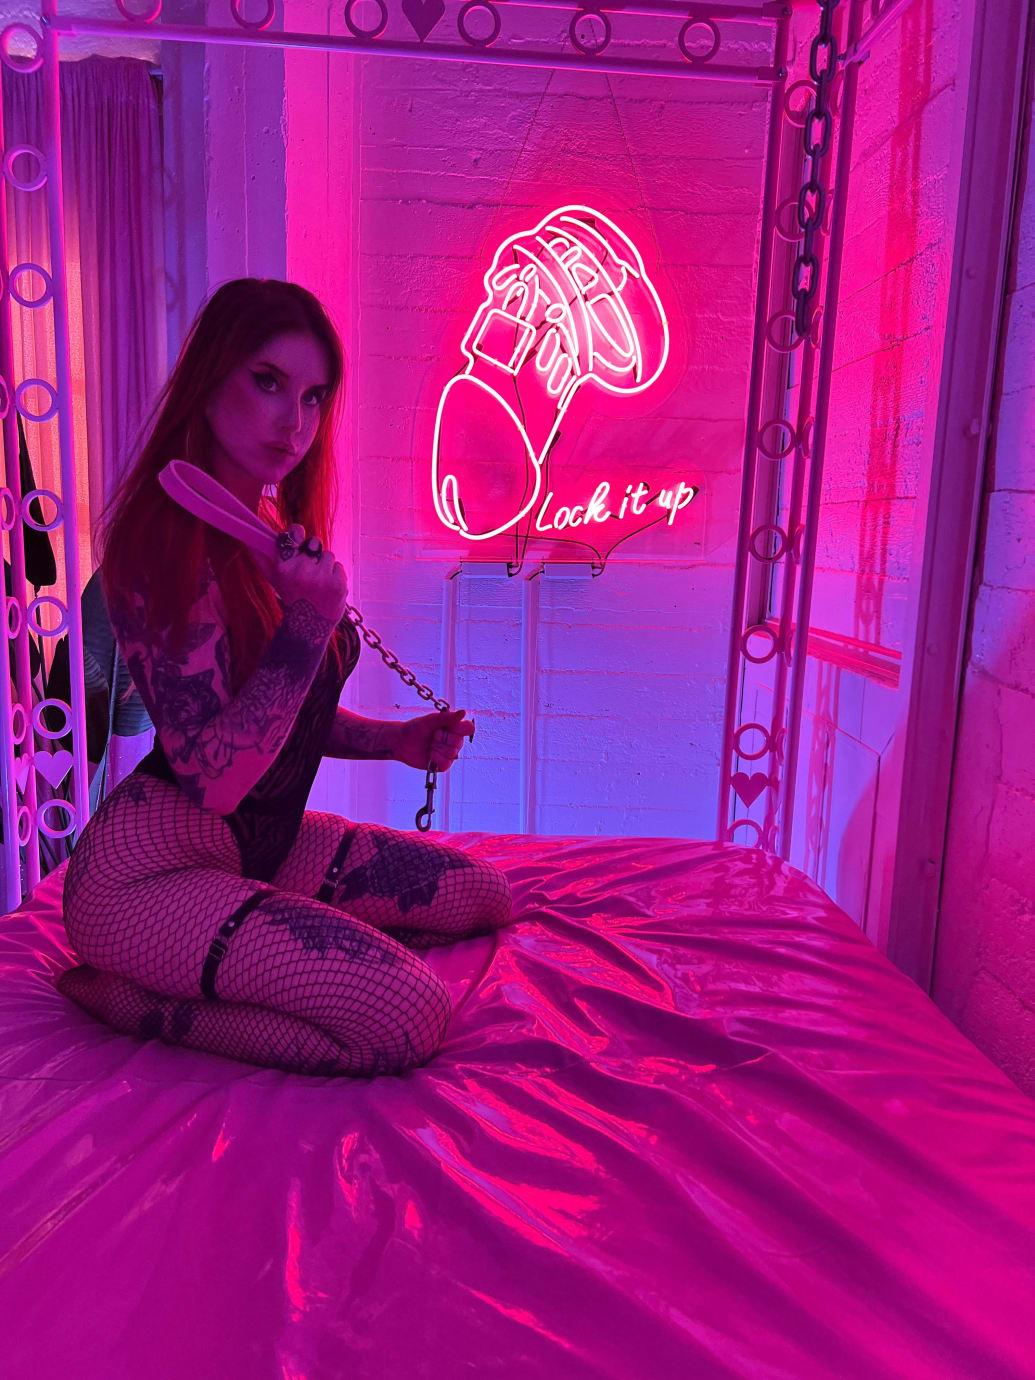 Photograph of Dominatrix Rin in black lingerie on a bed with a neon sign behind her